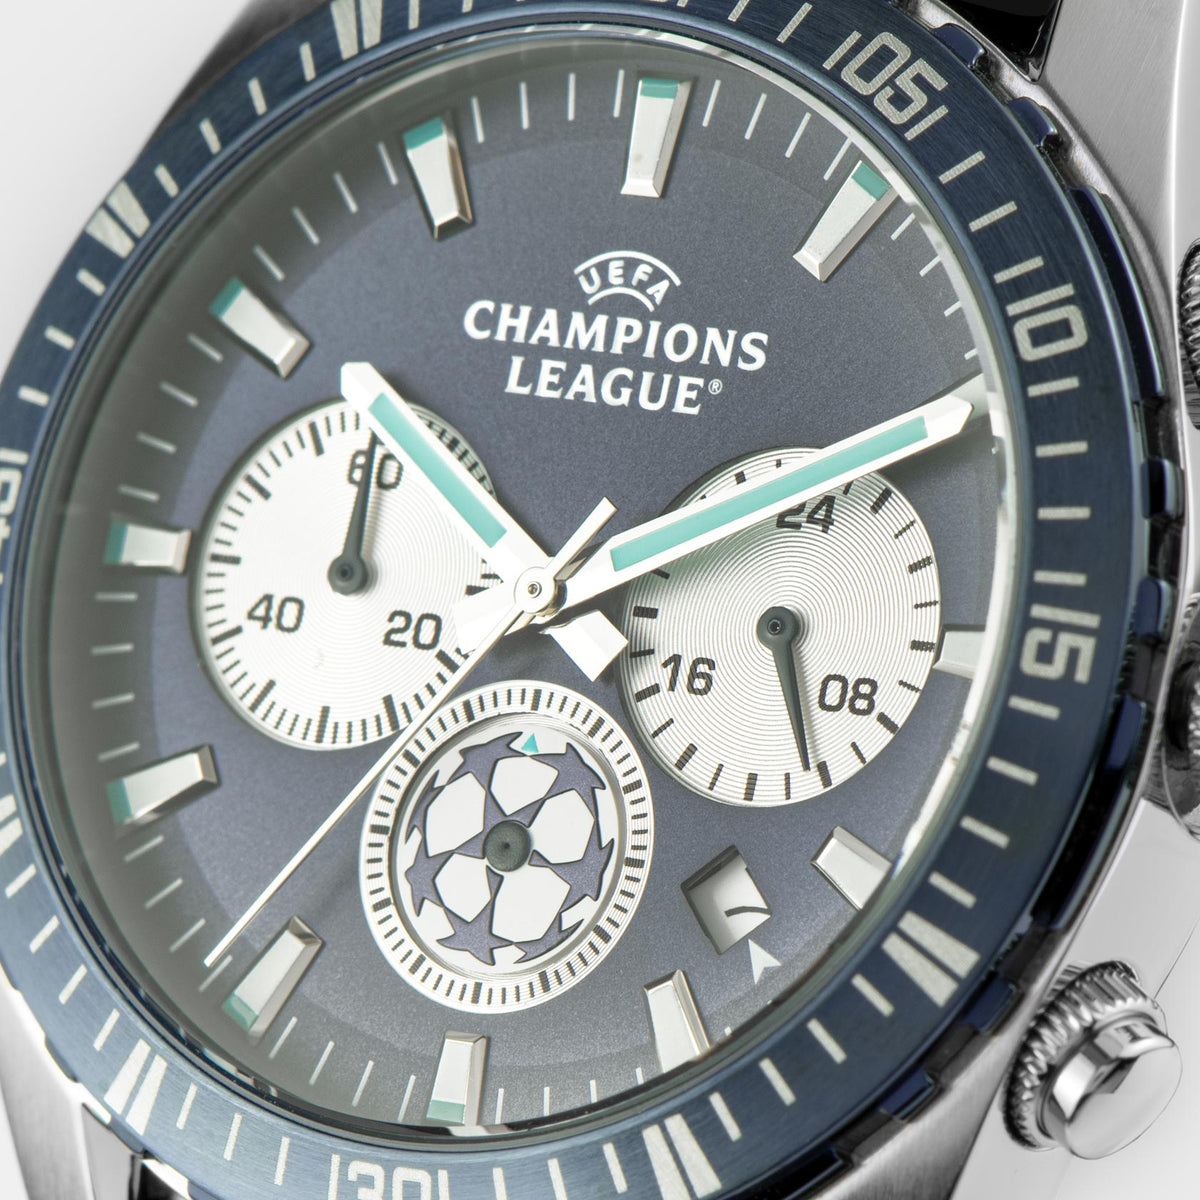 UCL Chronograph CL-102B Watch Online UEFA Store Competitions Club